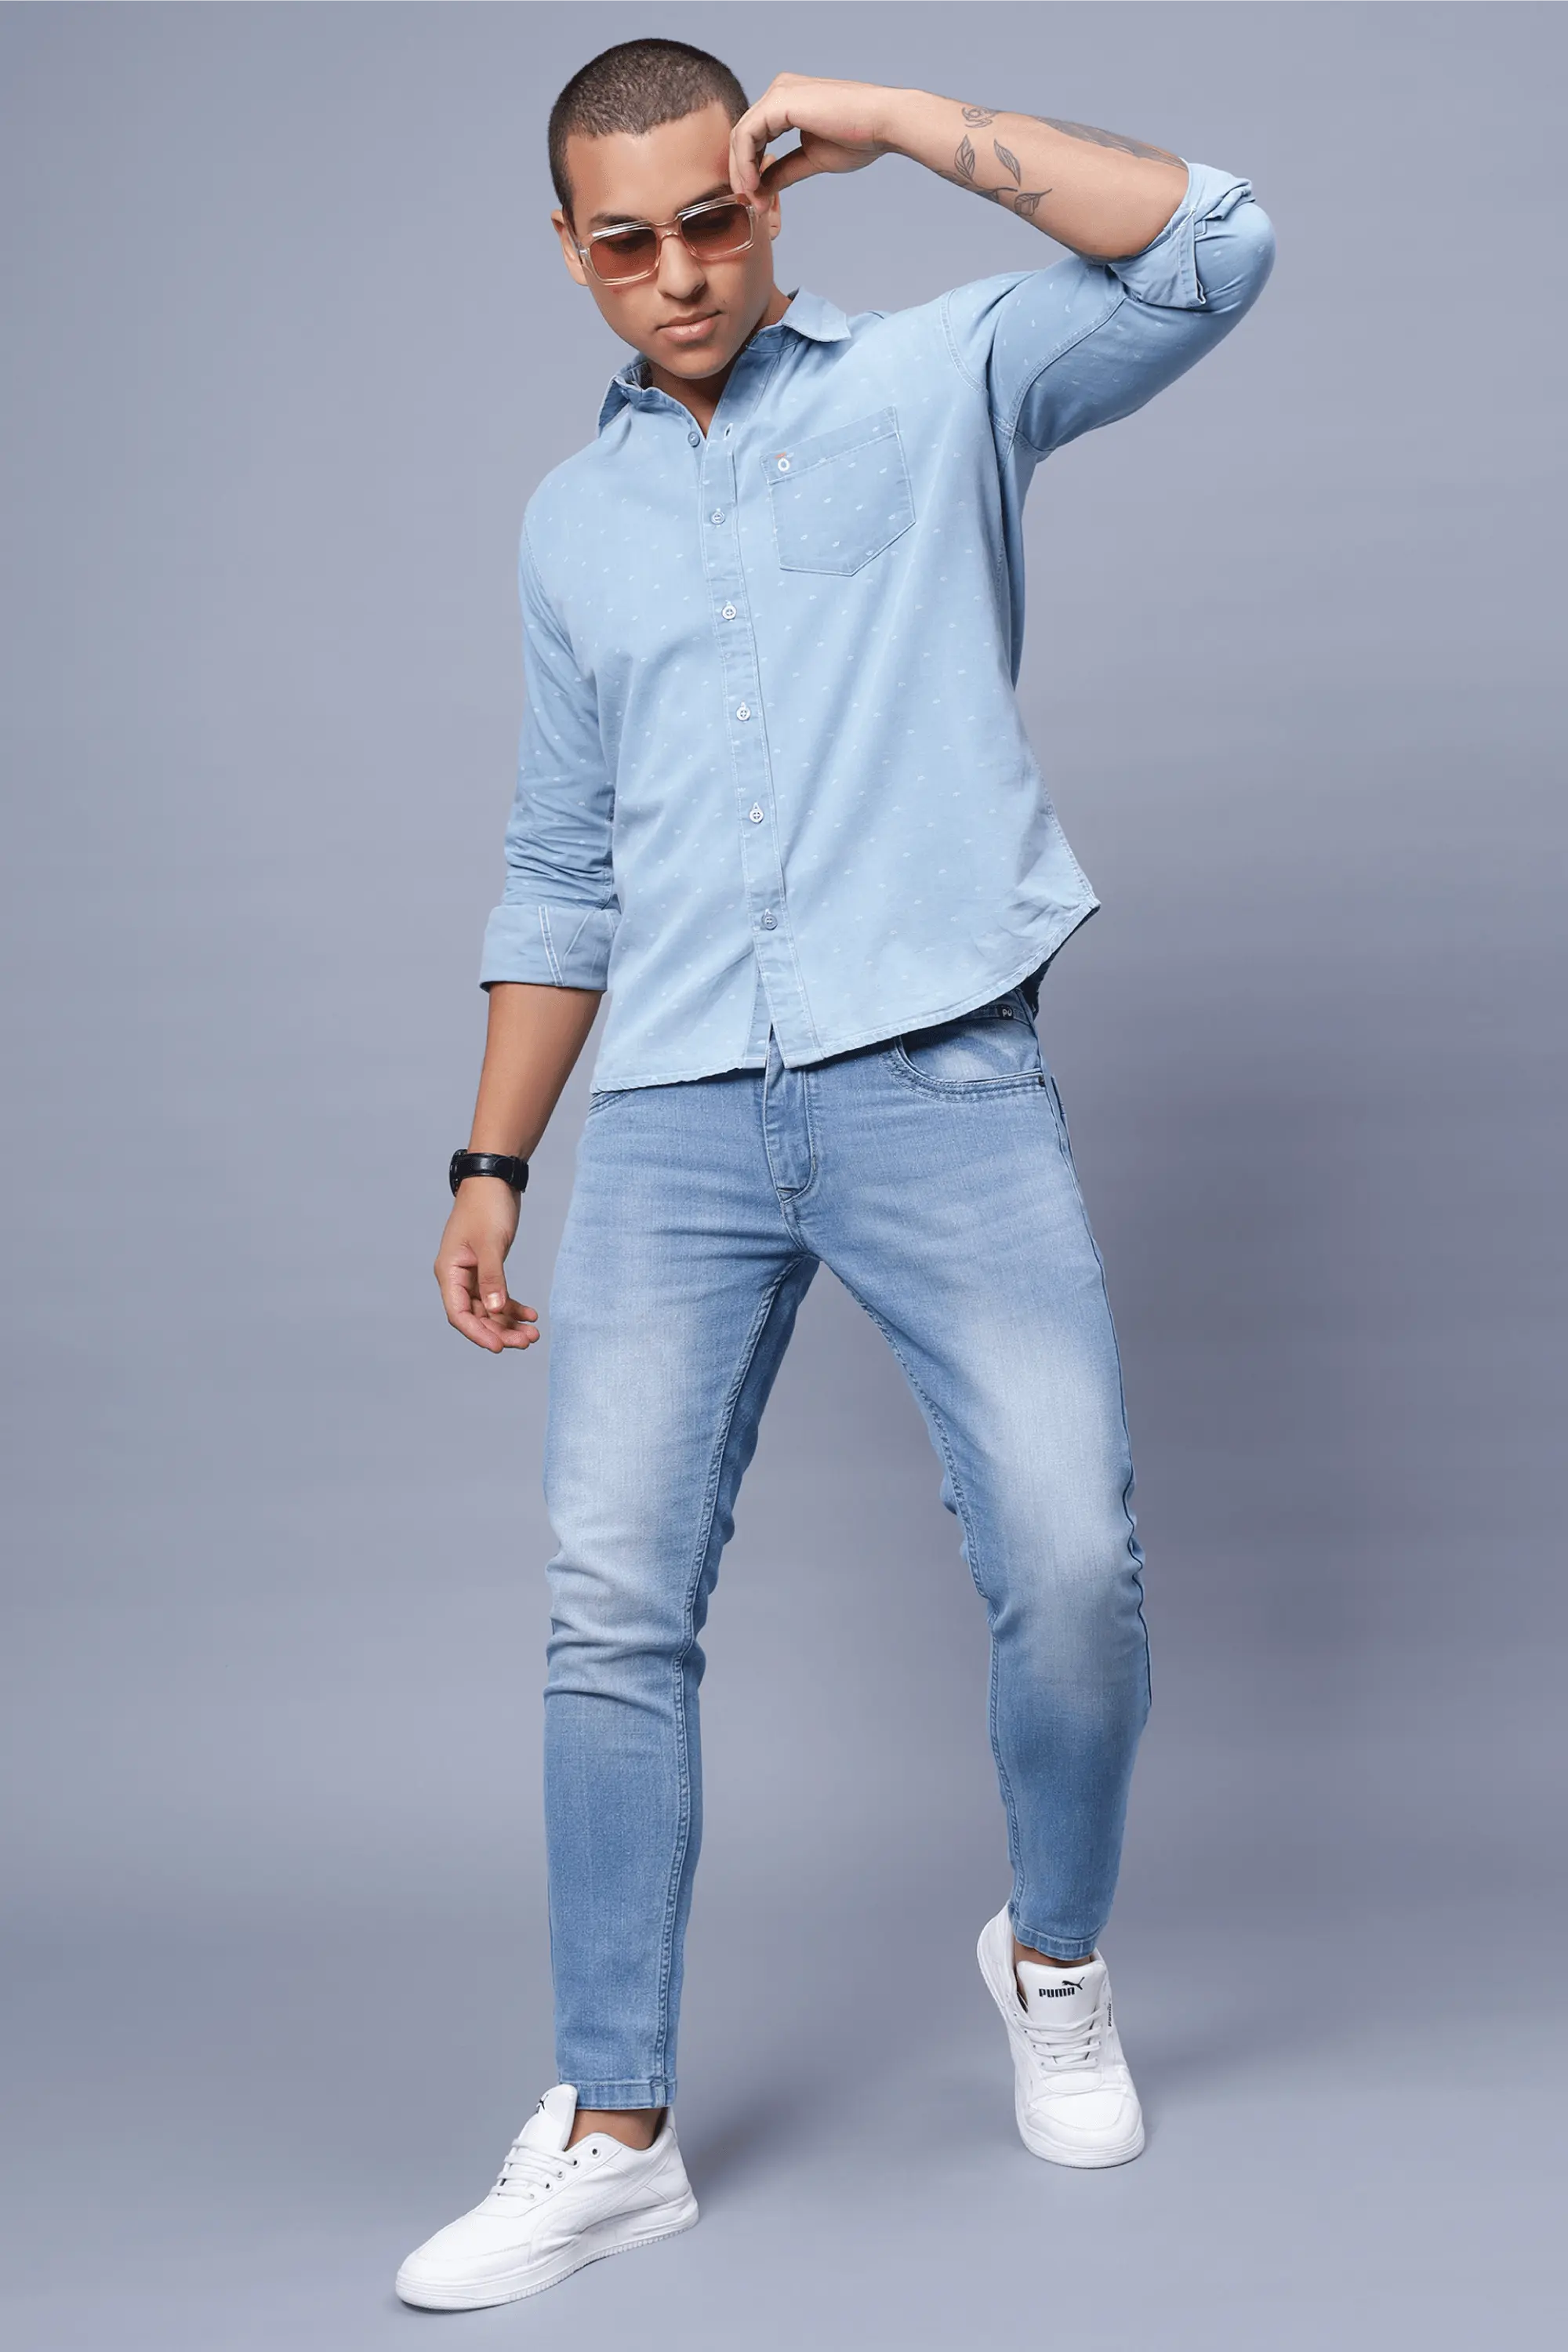 Mens casual fashion. Navy shirt, light blue jeans, slip on sneakers. |  Casual shirts outfit, Mens casual outfits, Mens outfits